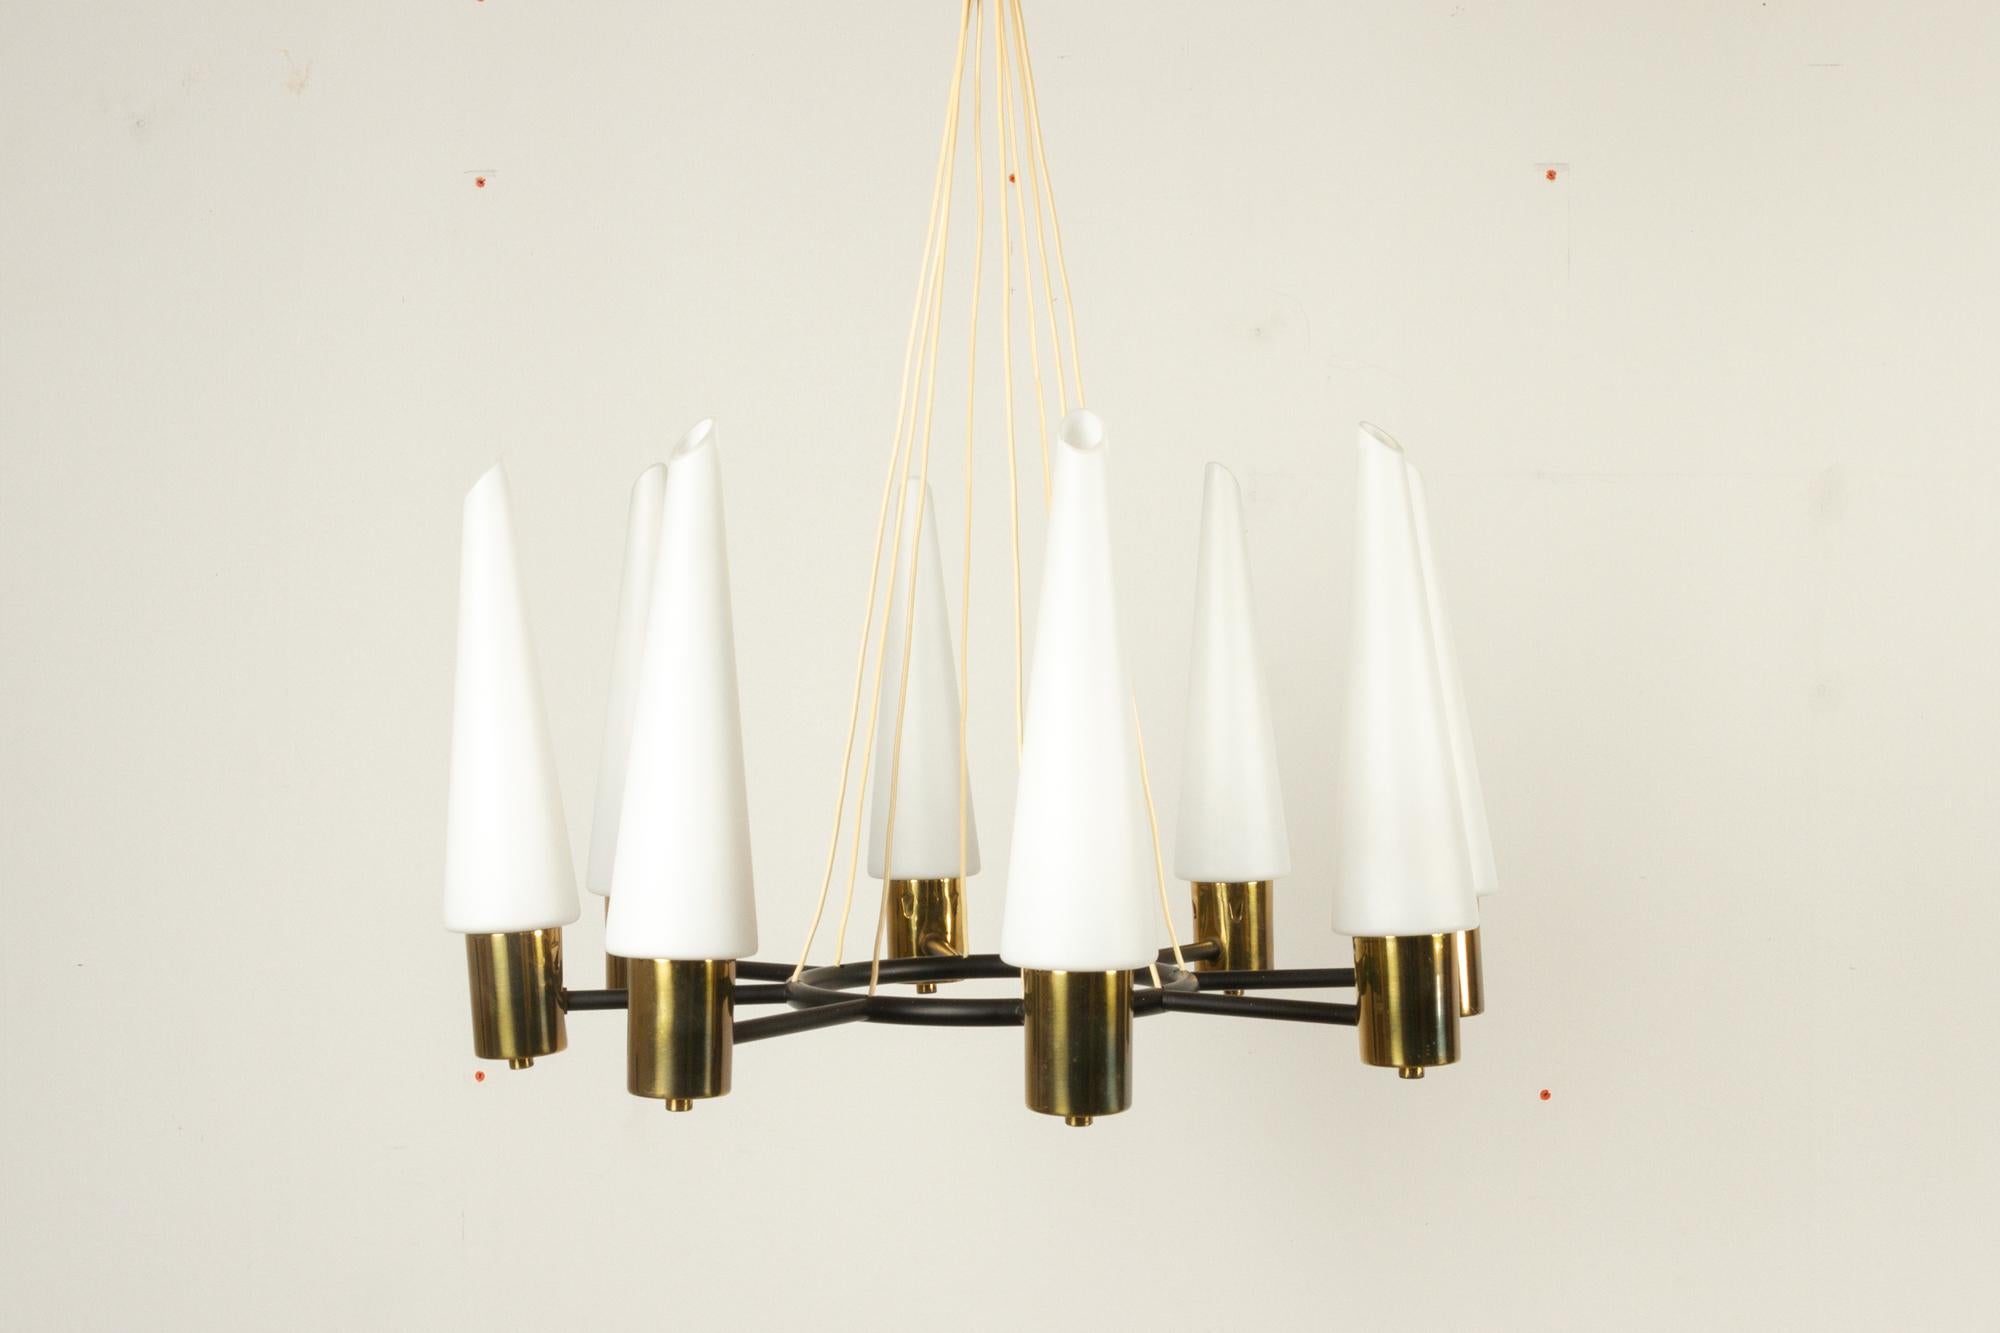 Vintage midcentury brass chandelier with opal glass shades, 1960s
Elegant eight armed chandelier with hand blown opaline glass shades. Black metal base suspended in eight wires. Comes with two extra original glass shades.
Very good vintage